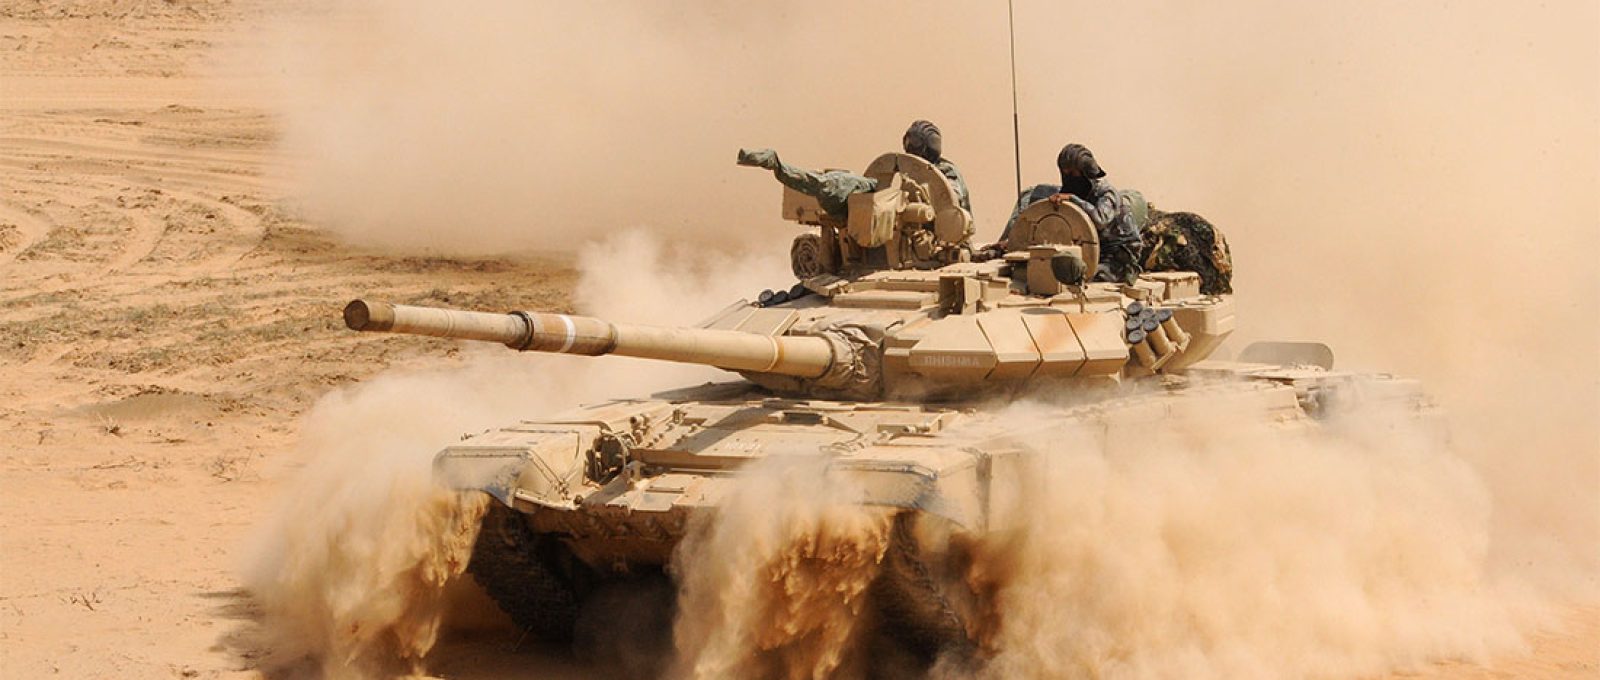 Tanque russo T-90 (AFP/East News).